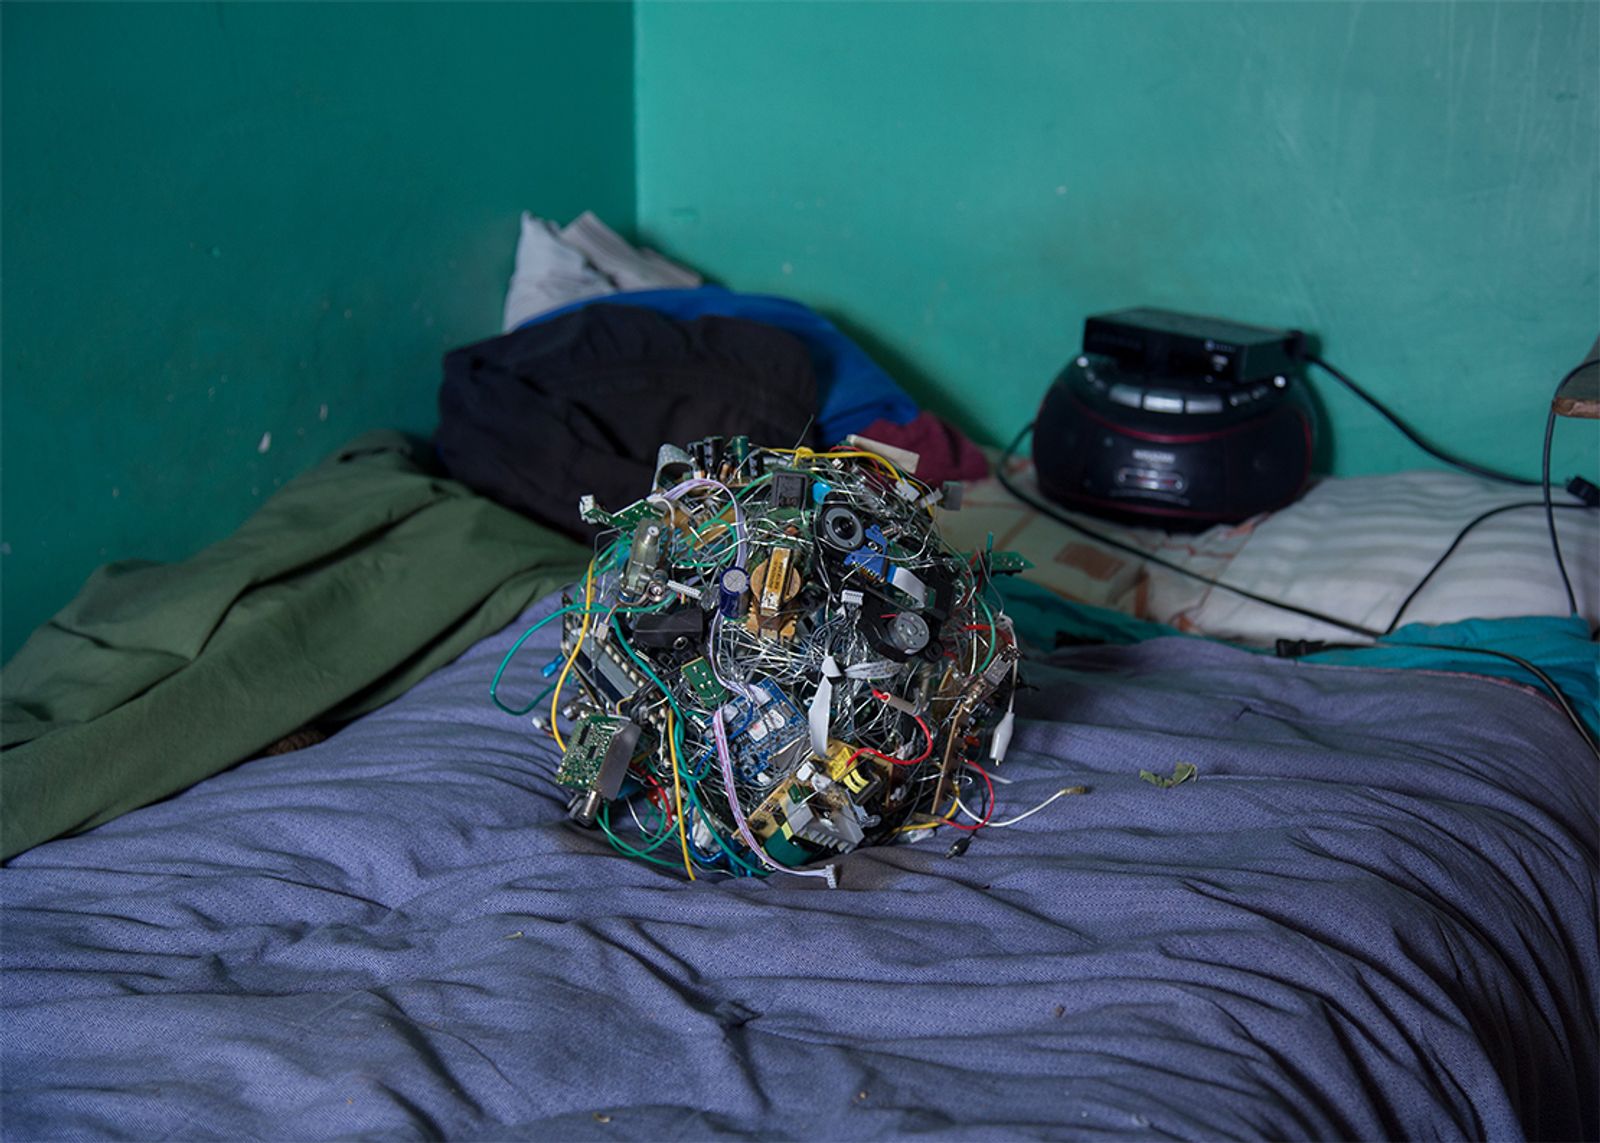 © Denis Serrano - The electronic trash in his green room.